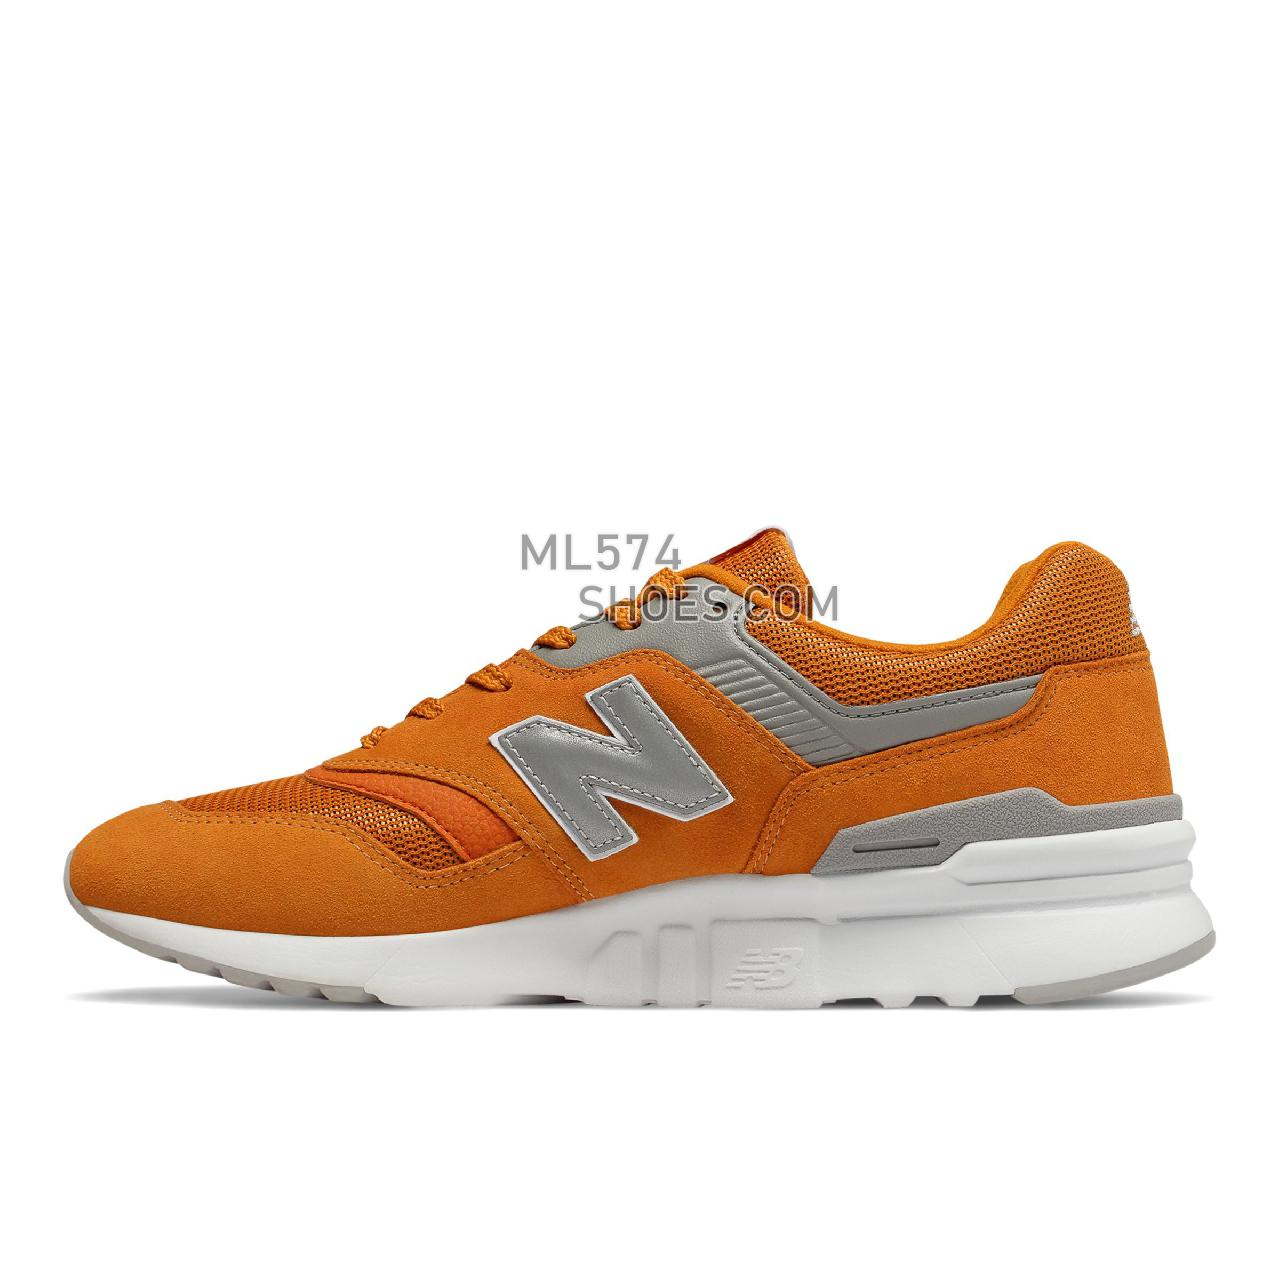 New Balance 997H - Men's Sport Style Sneakers - Desert Gold with Silver - CM997HCF